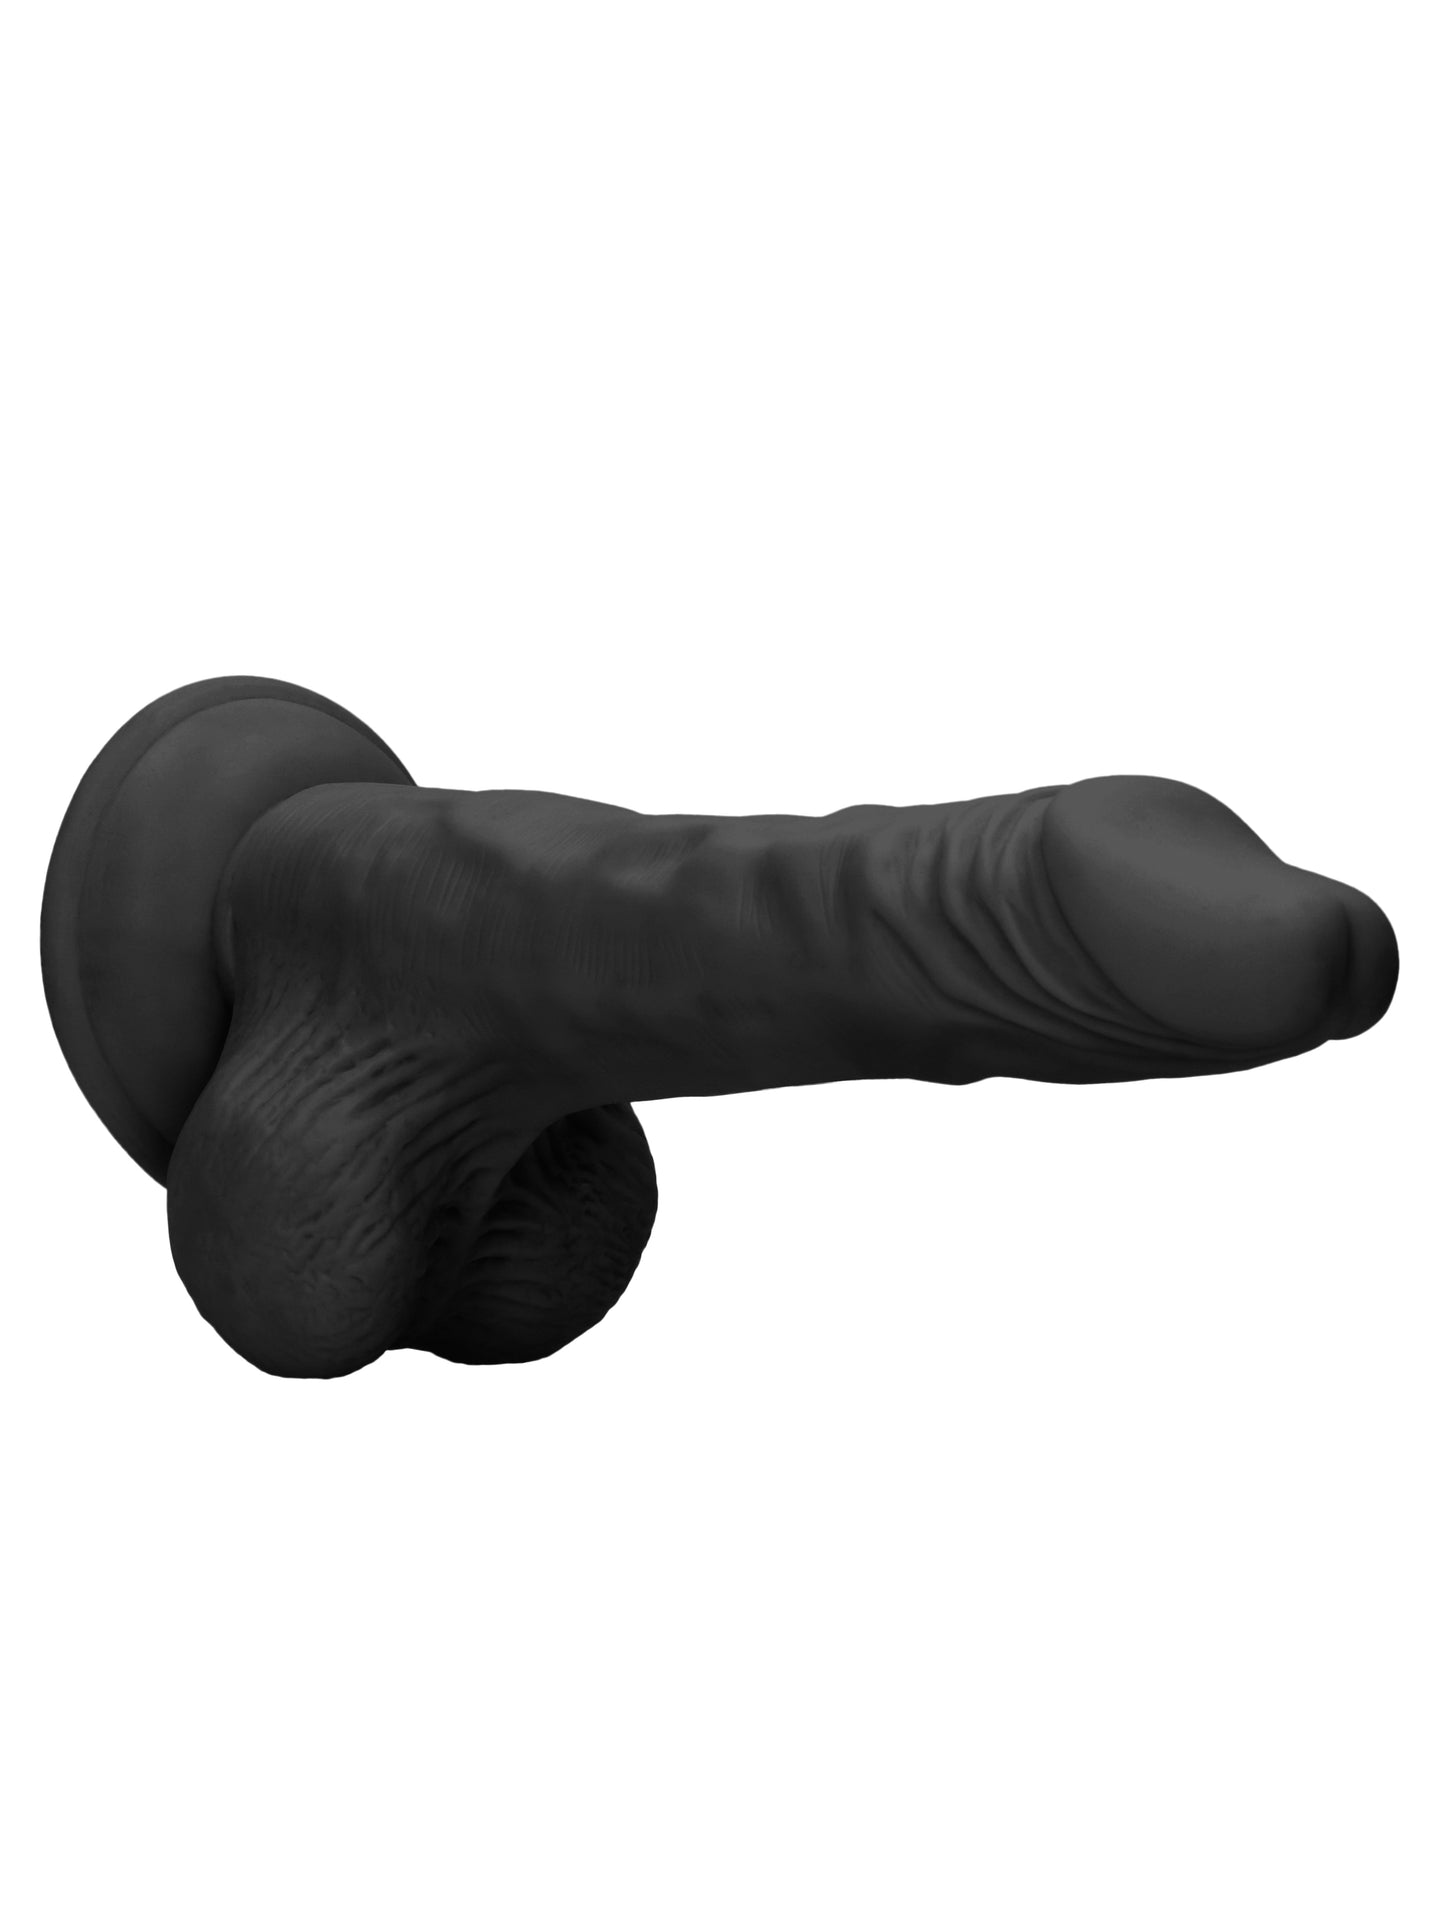 RealRock - Realistic Dong with Balls and Suction Cup Black 8" / 20 cm